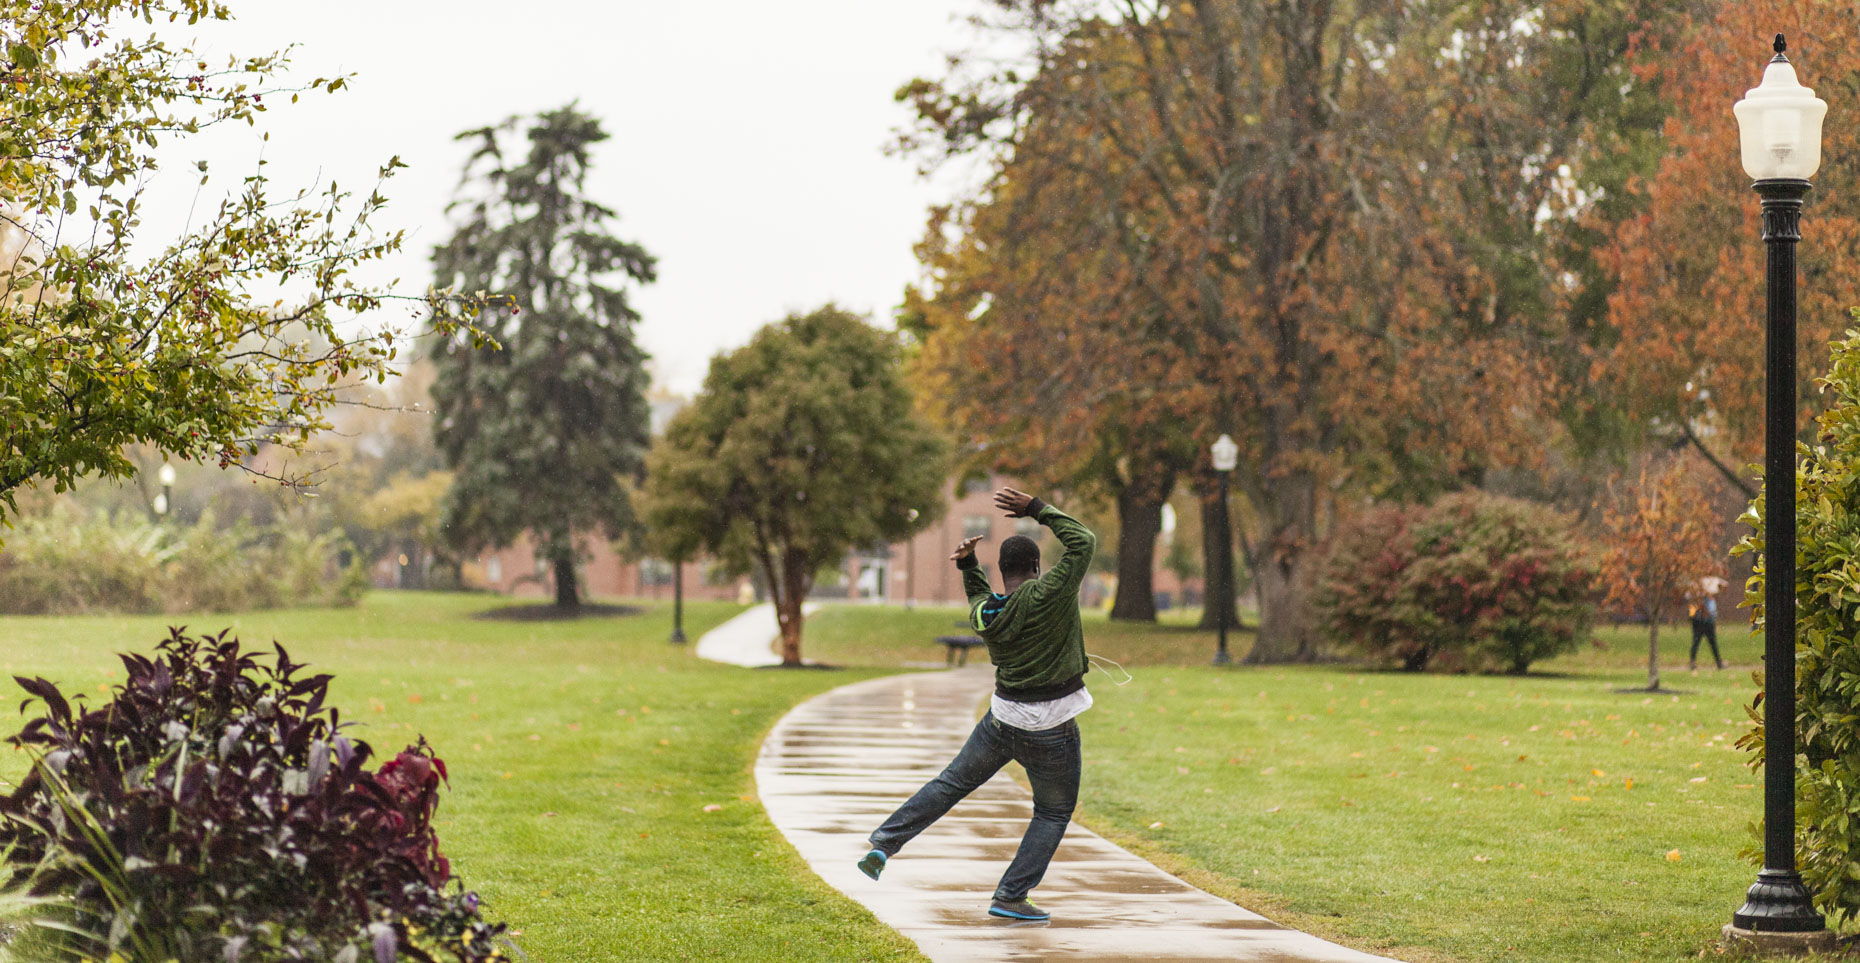 A college student dances in a sudden rain shower on campus in a photo by Ryan Donnell